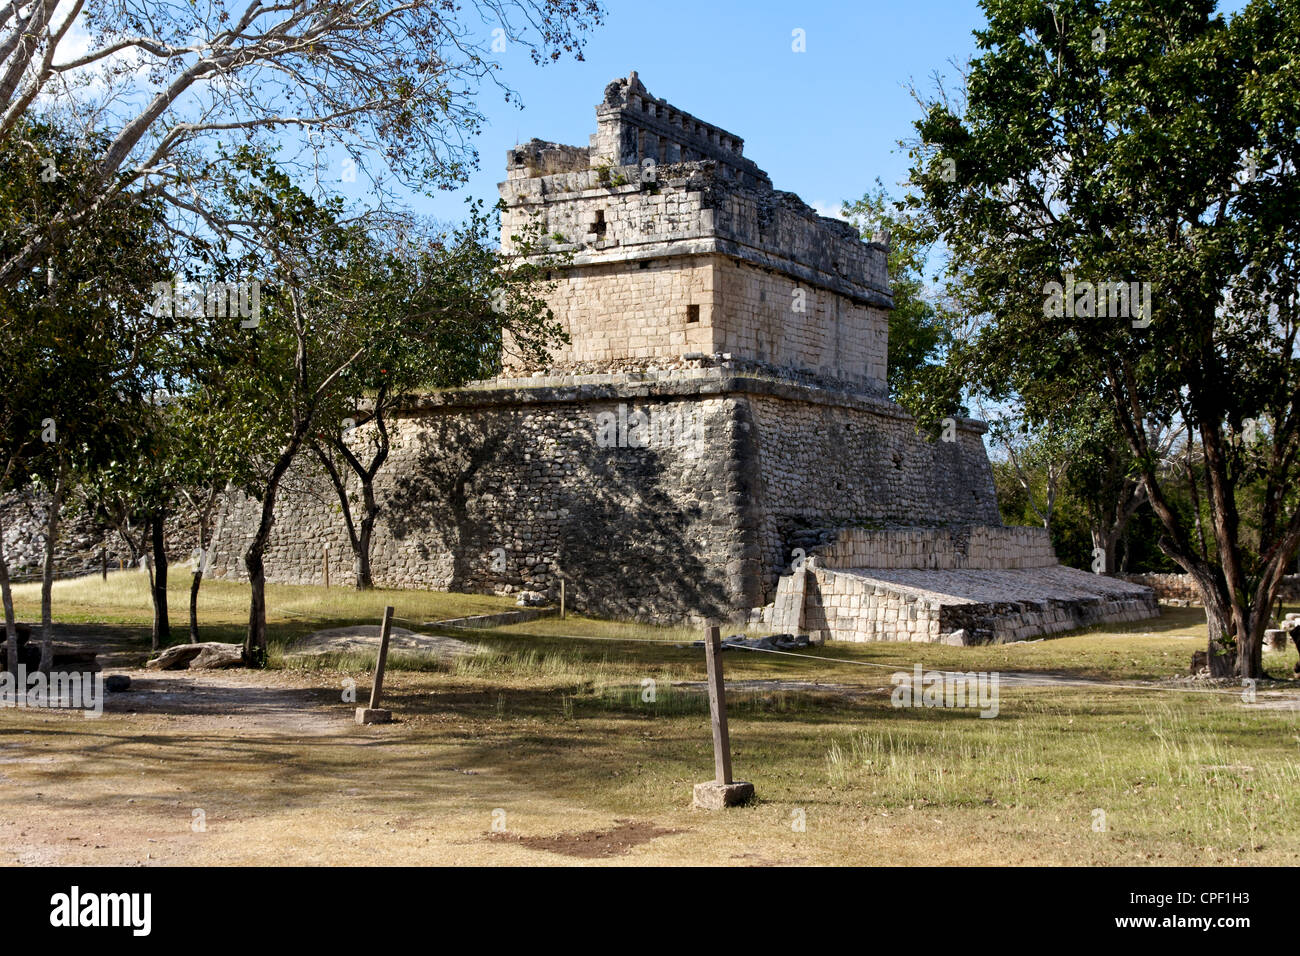 Ruin of a small Mayan structure among trees at the archeological site of Chichen Itza, Yucatan, Mexico. Stock Photo